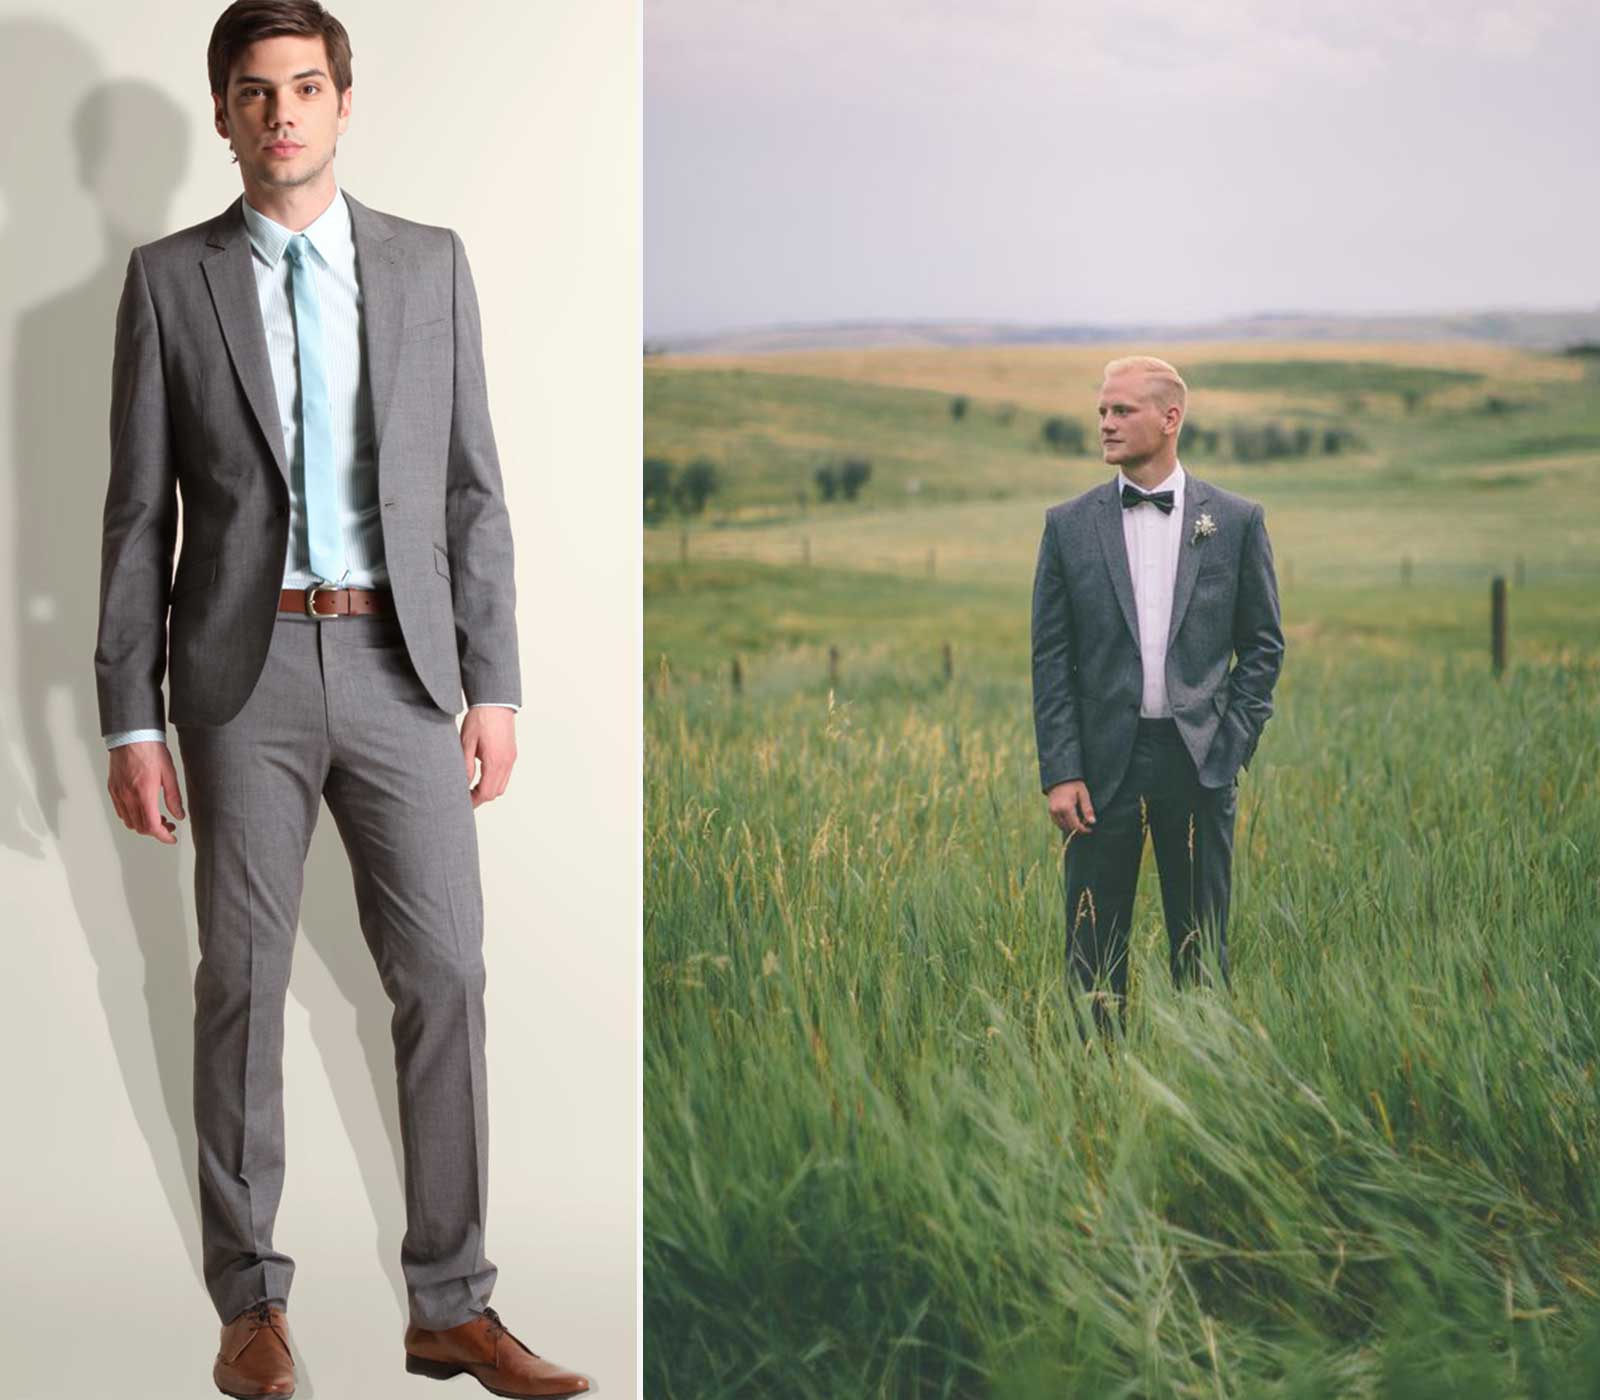 Photos of men wearing fitted, bespoke, grey suits